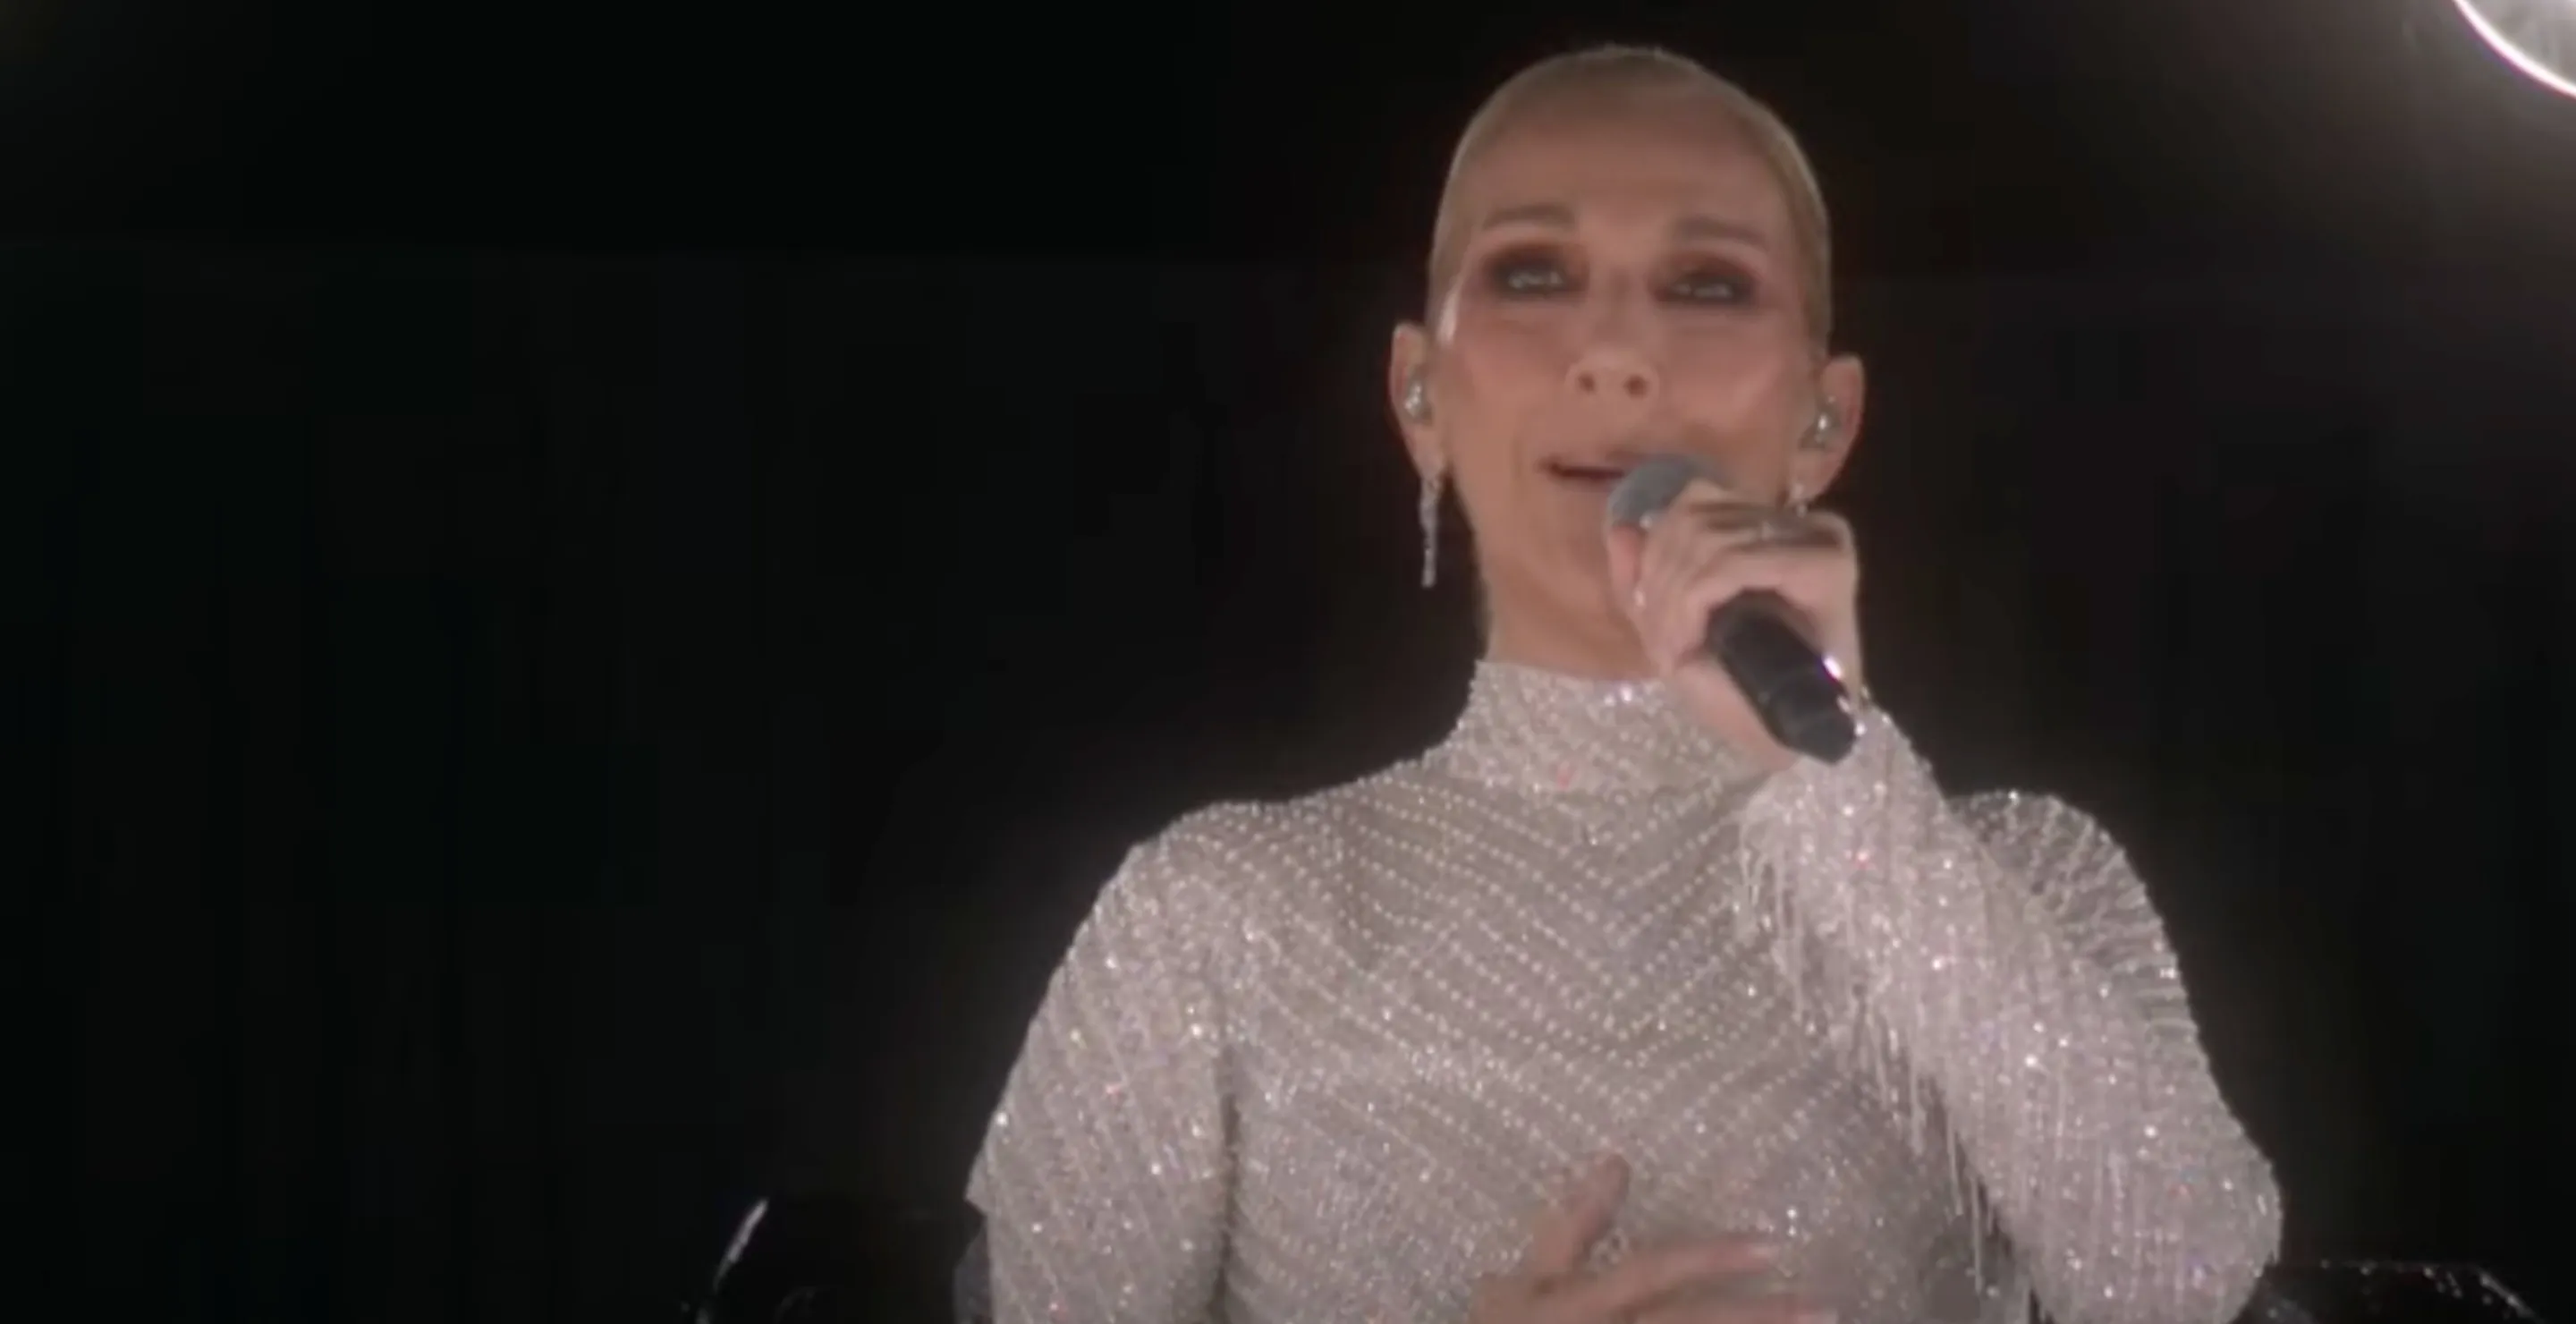 Celine Dion Moves Kelly Clarkson To Tears With Rare Performance At Paris Olympics Opening Ceremony